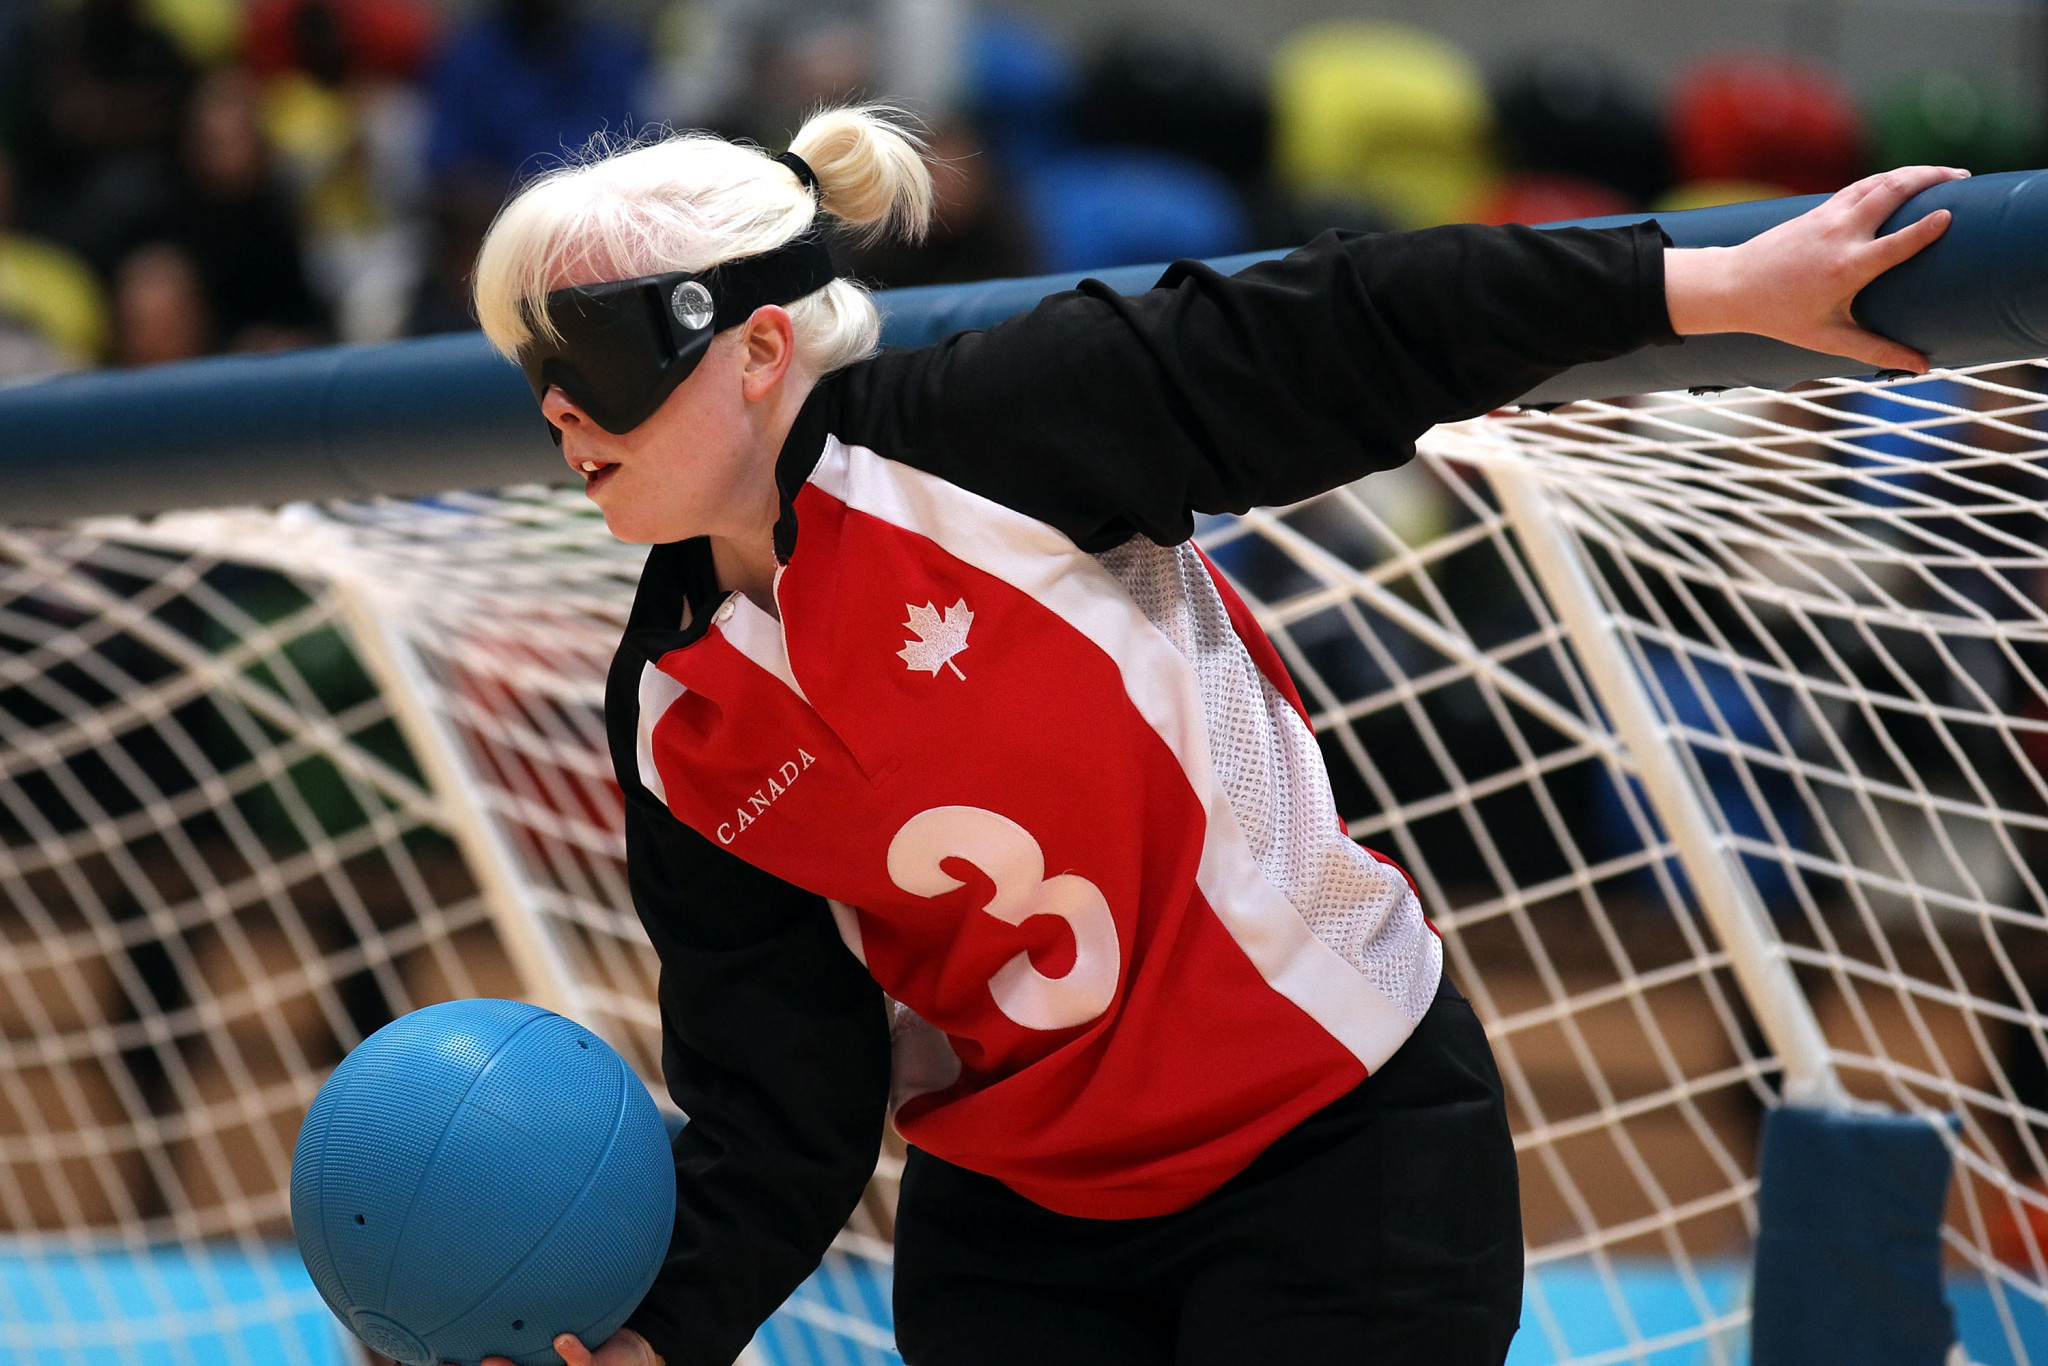 The women's goalball squad at Lima 2019 this month will be led by two-time Paralympian Whitney Bogart, the only returning member from the Toronto 2015 squad ©Getty Images